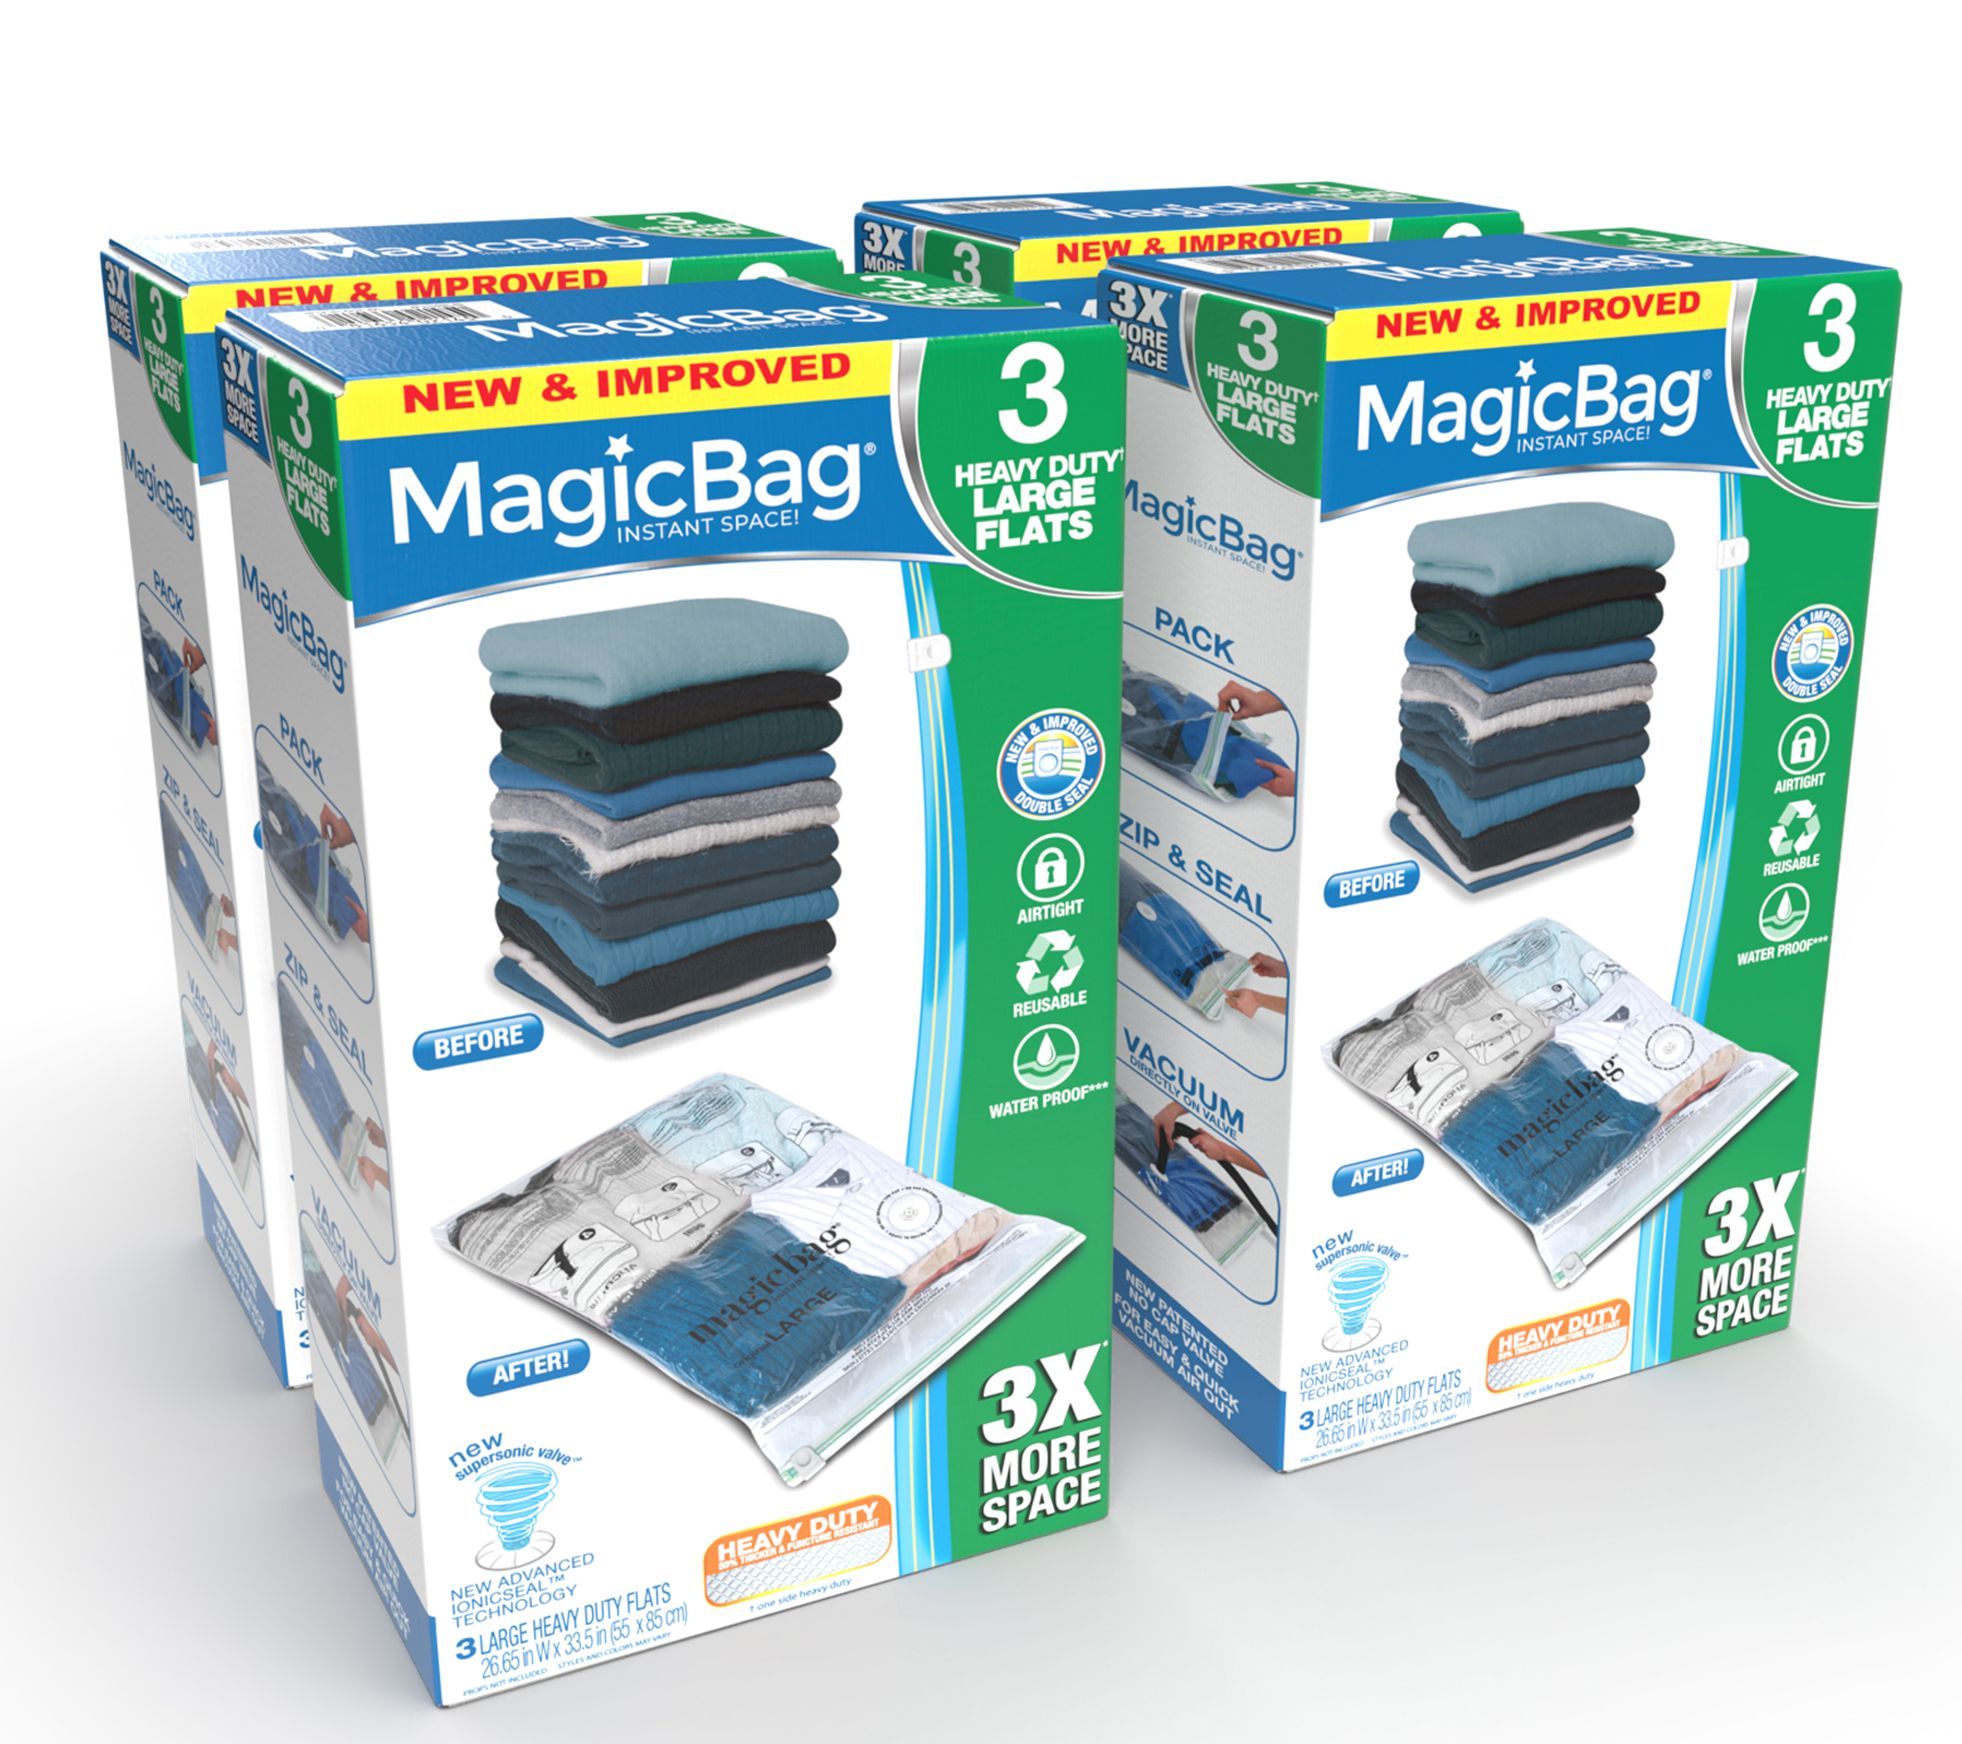  Smart Design MagicBag Flat Heavy Duty Vacuum Storage Bags –  Large Size, 3 Bags – Space Saver Vacuum Storage Bags with Thick, Puncture  Resistant Material for Optimal Home Organization and Storage 